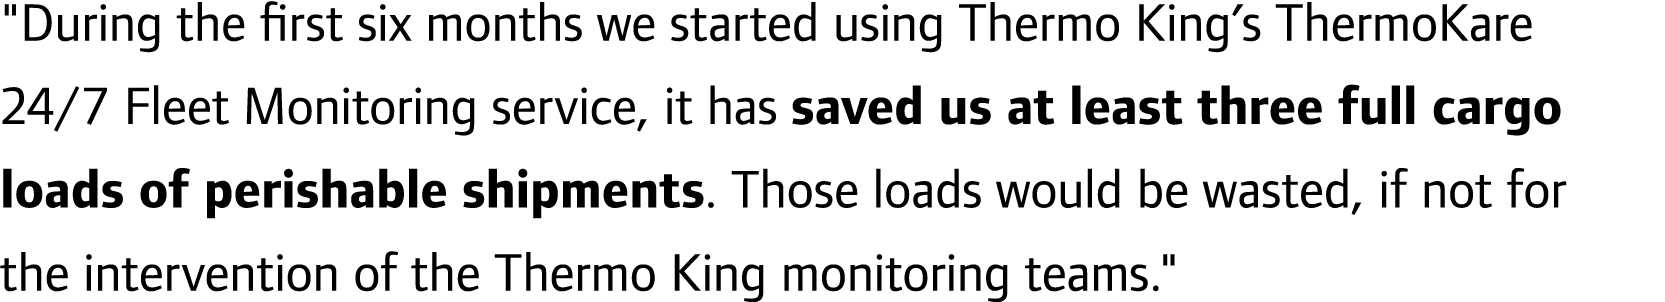 \“During the first six months we started using Thermo King’s ThermoKare 24/7 Fleet Monitoring service, it has saved u...